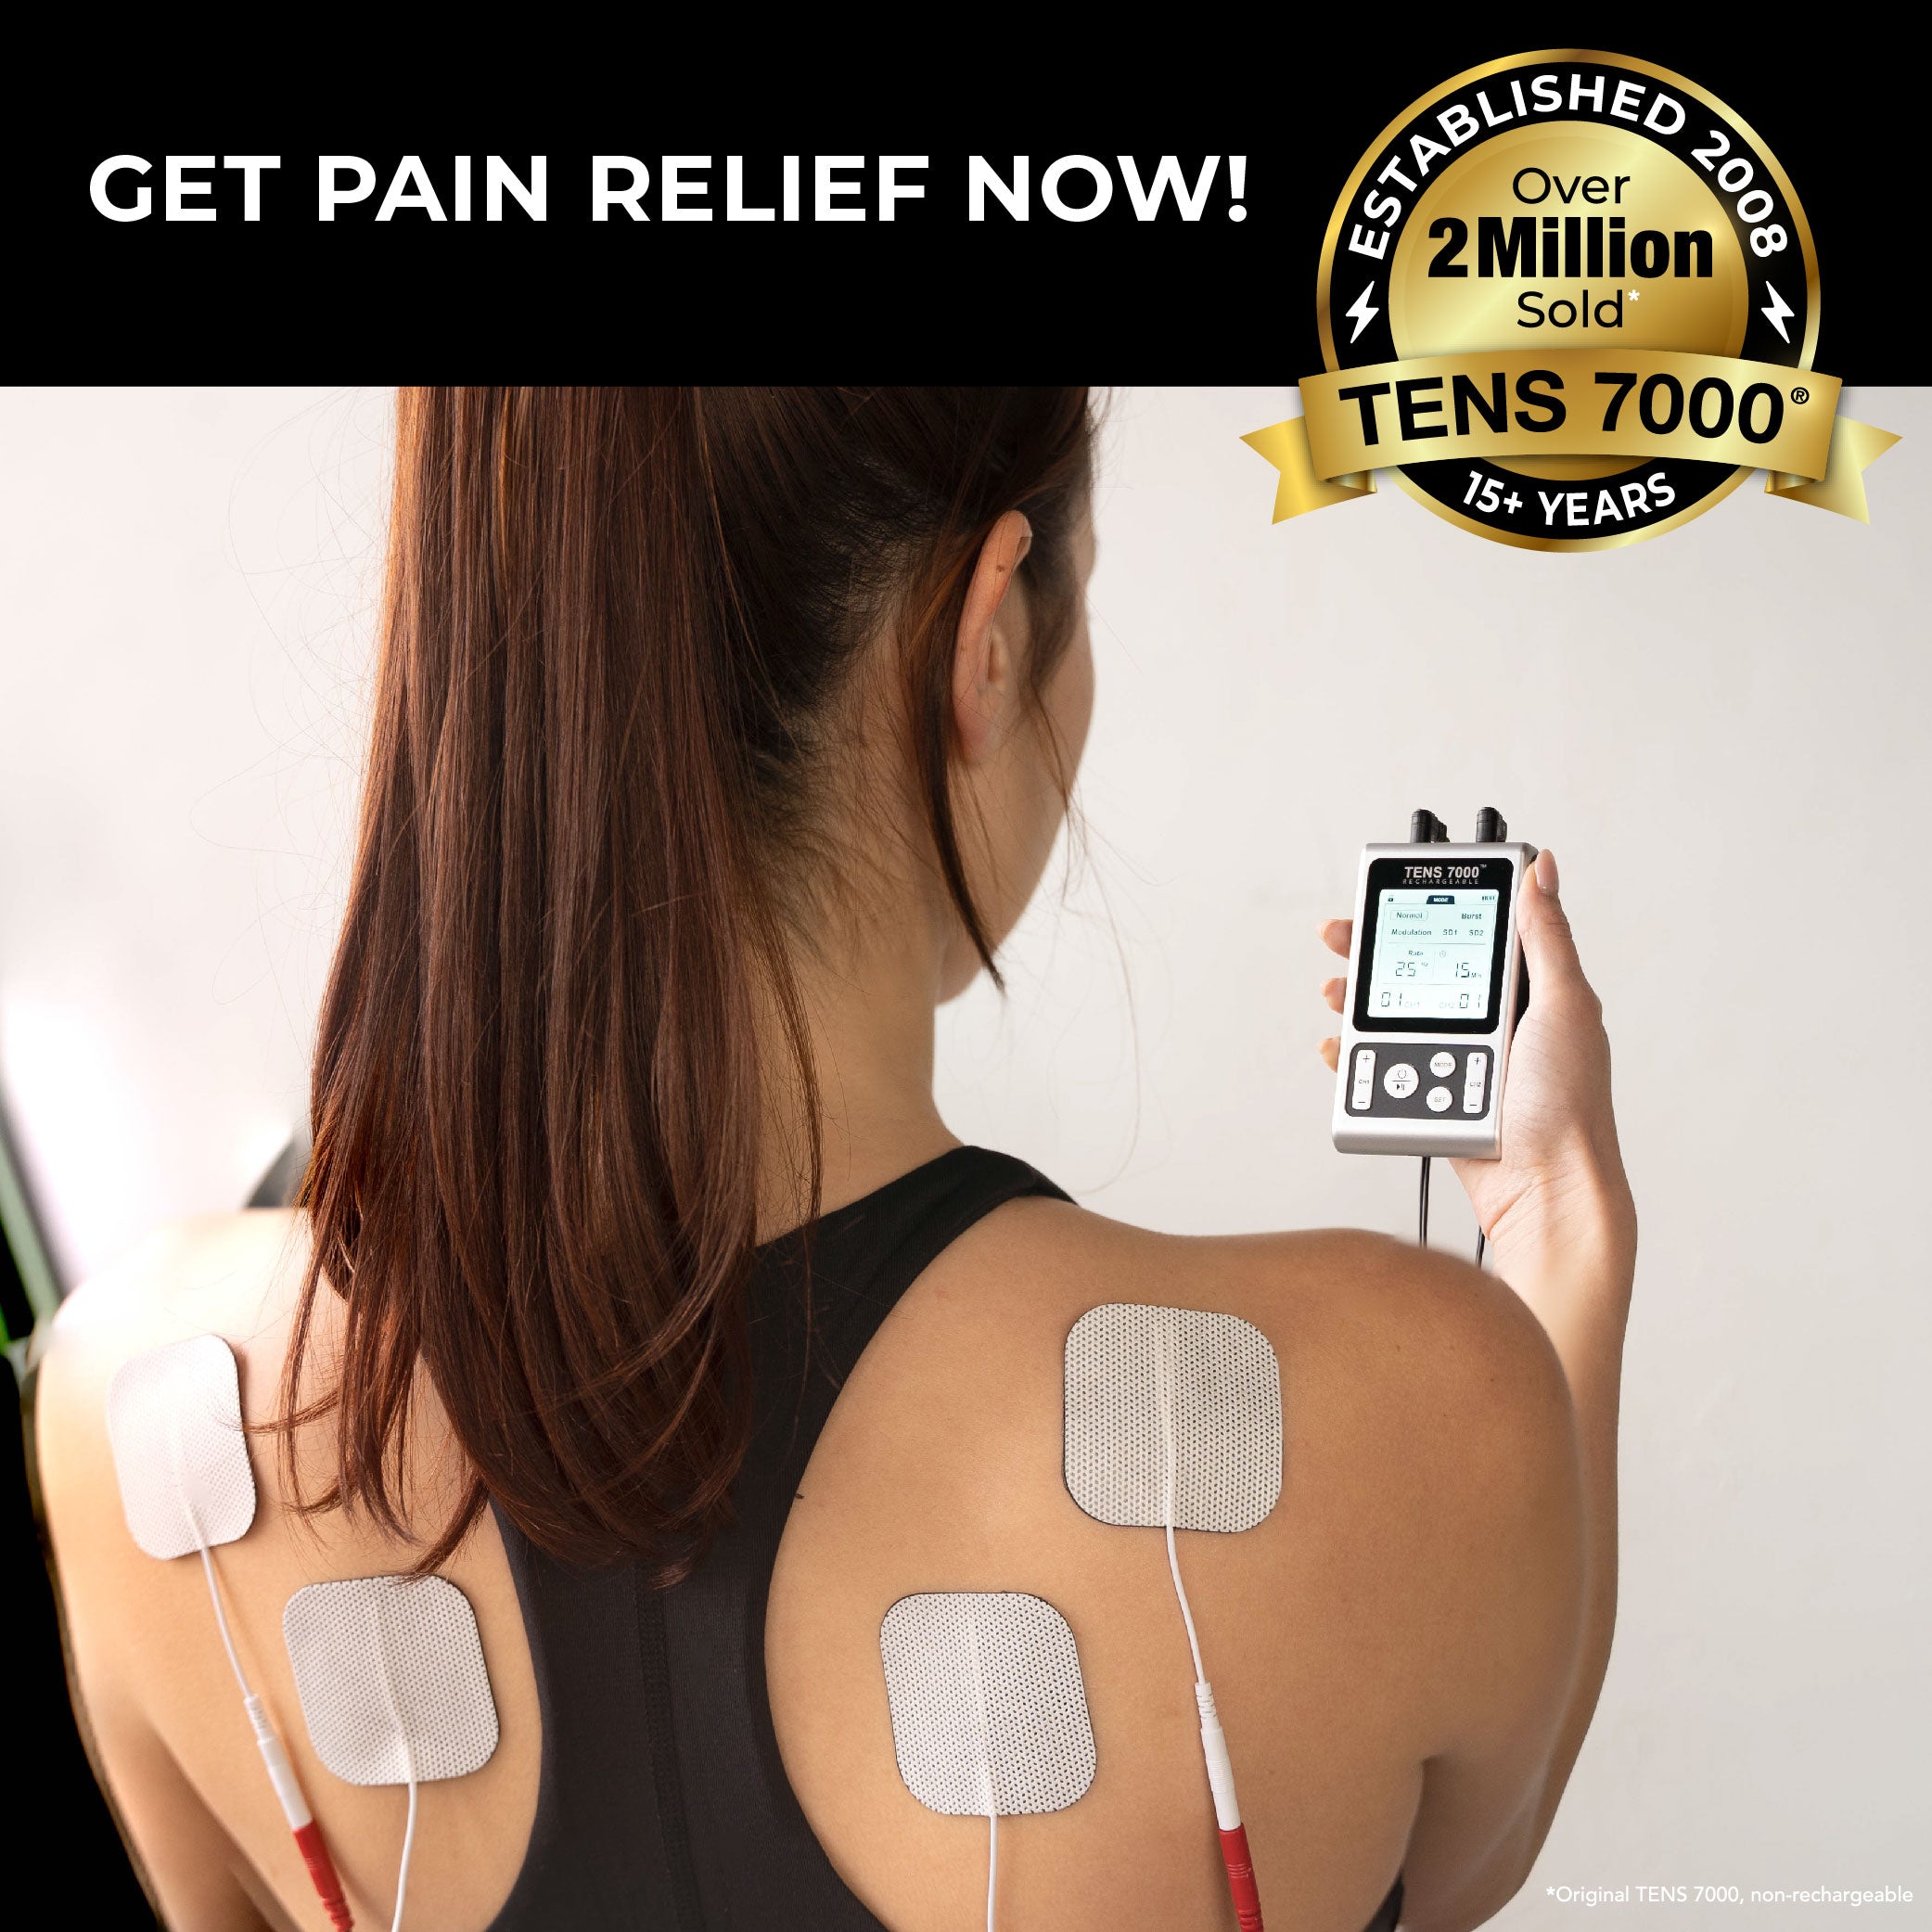 TENS 7000 Rechargeable TENS Unit Muscle Stimulator and Pain Relief Machine